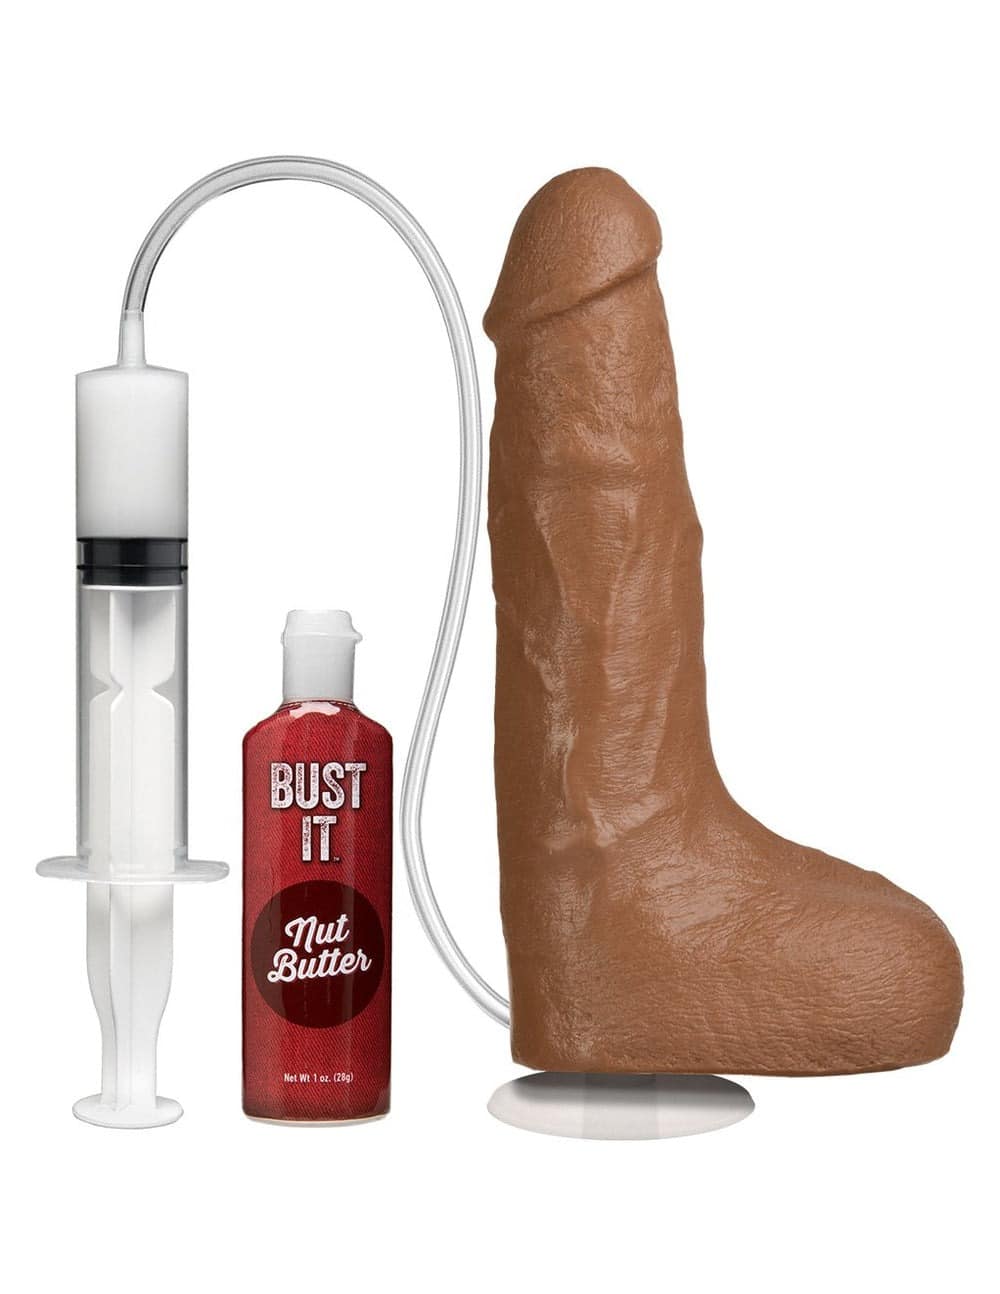 Doc Johnson Bust It 8.5 Inch Realistic Squirting Cock